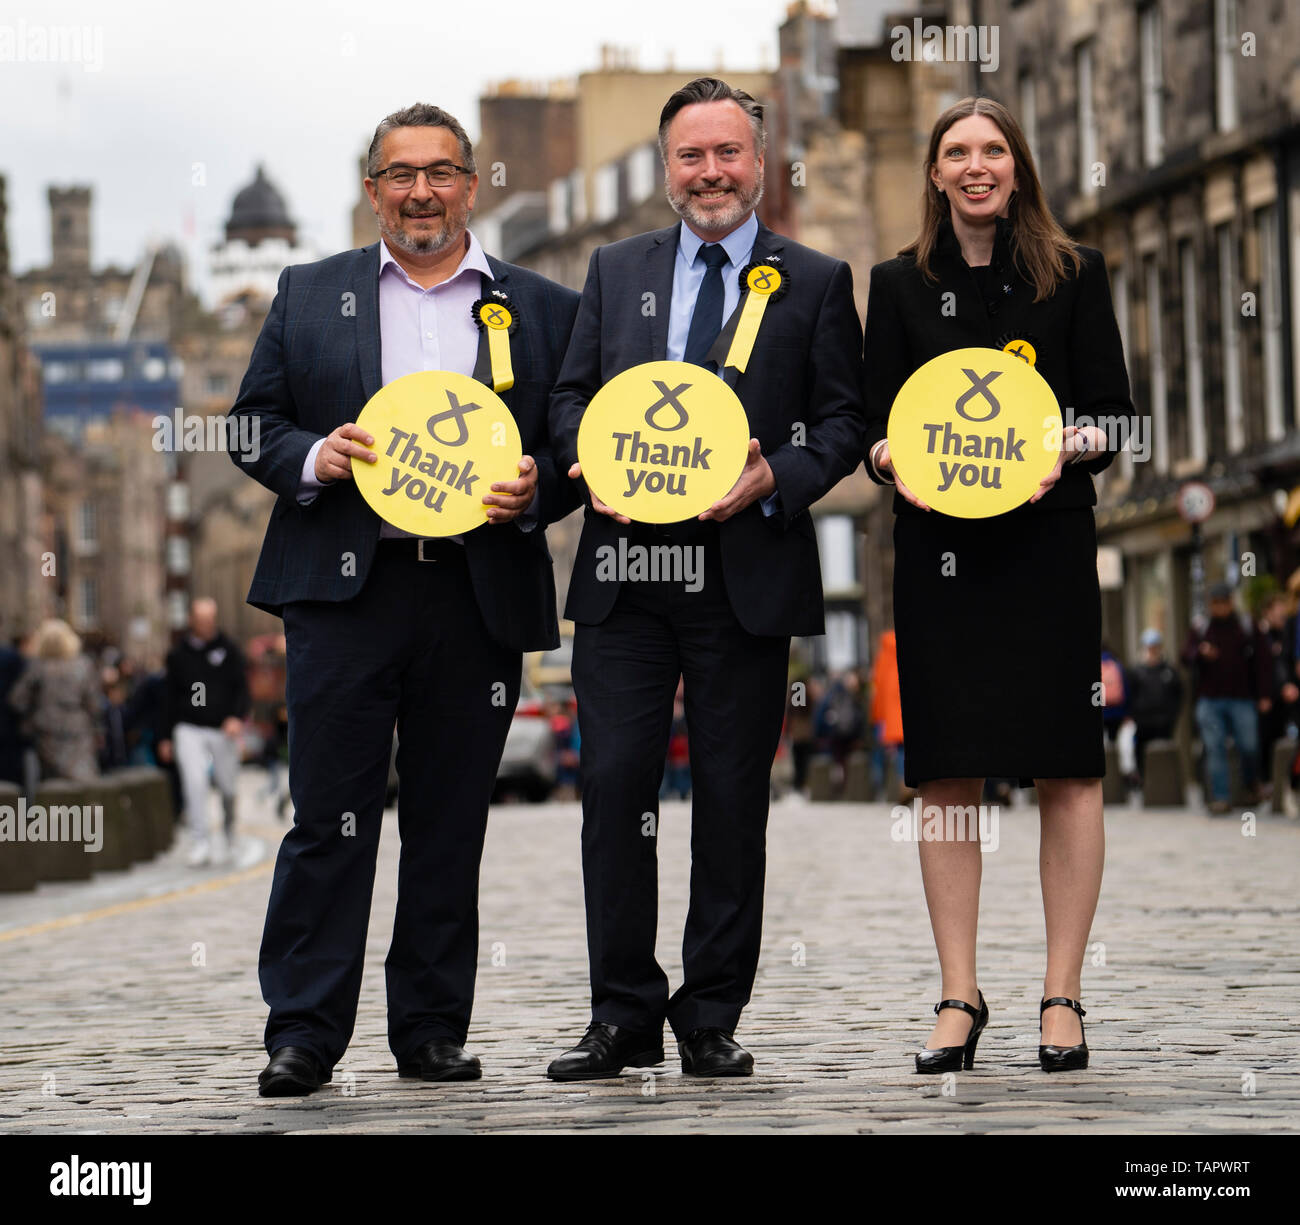 Edinburgh, Scotland, UK. 27th May, 2019. The six new Scottish MEPs are declared at the City Chambers in Edinburgh,  Pictured l to r SNP's Christian Allard, Alyn Smith, and Aileen McLeod, Credit: Iain Masterton/Alamy Live News Stock Photo